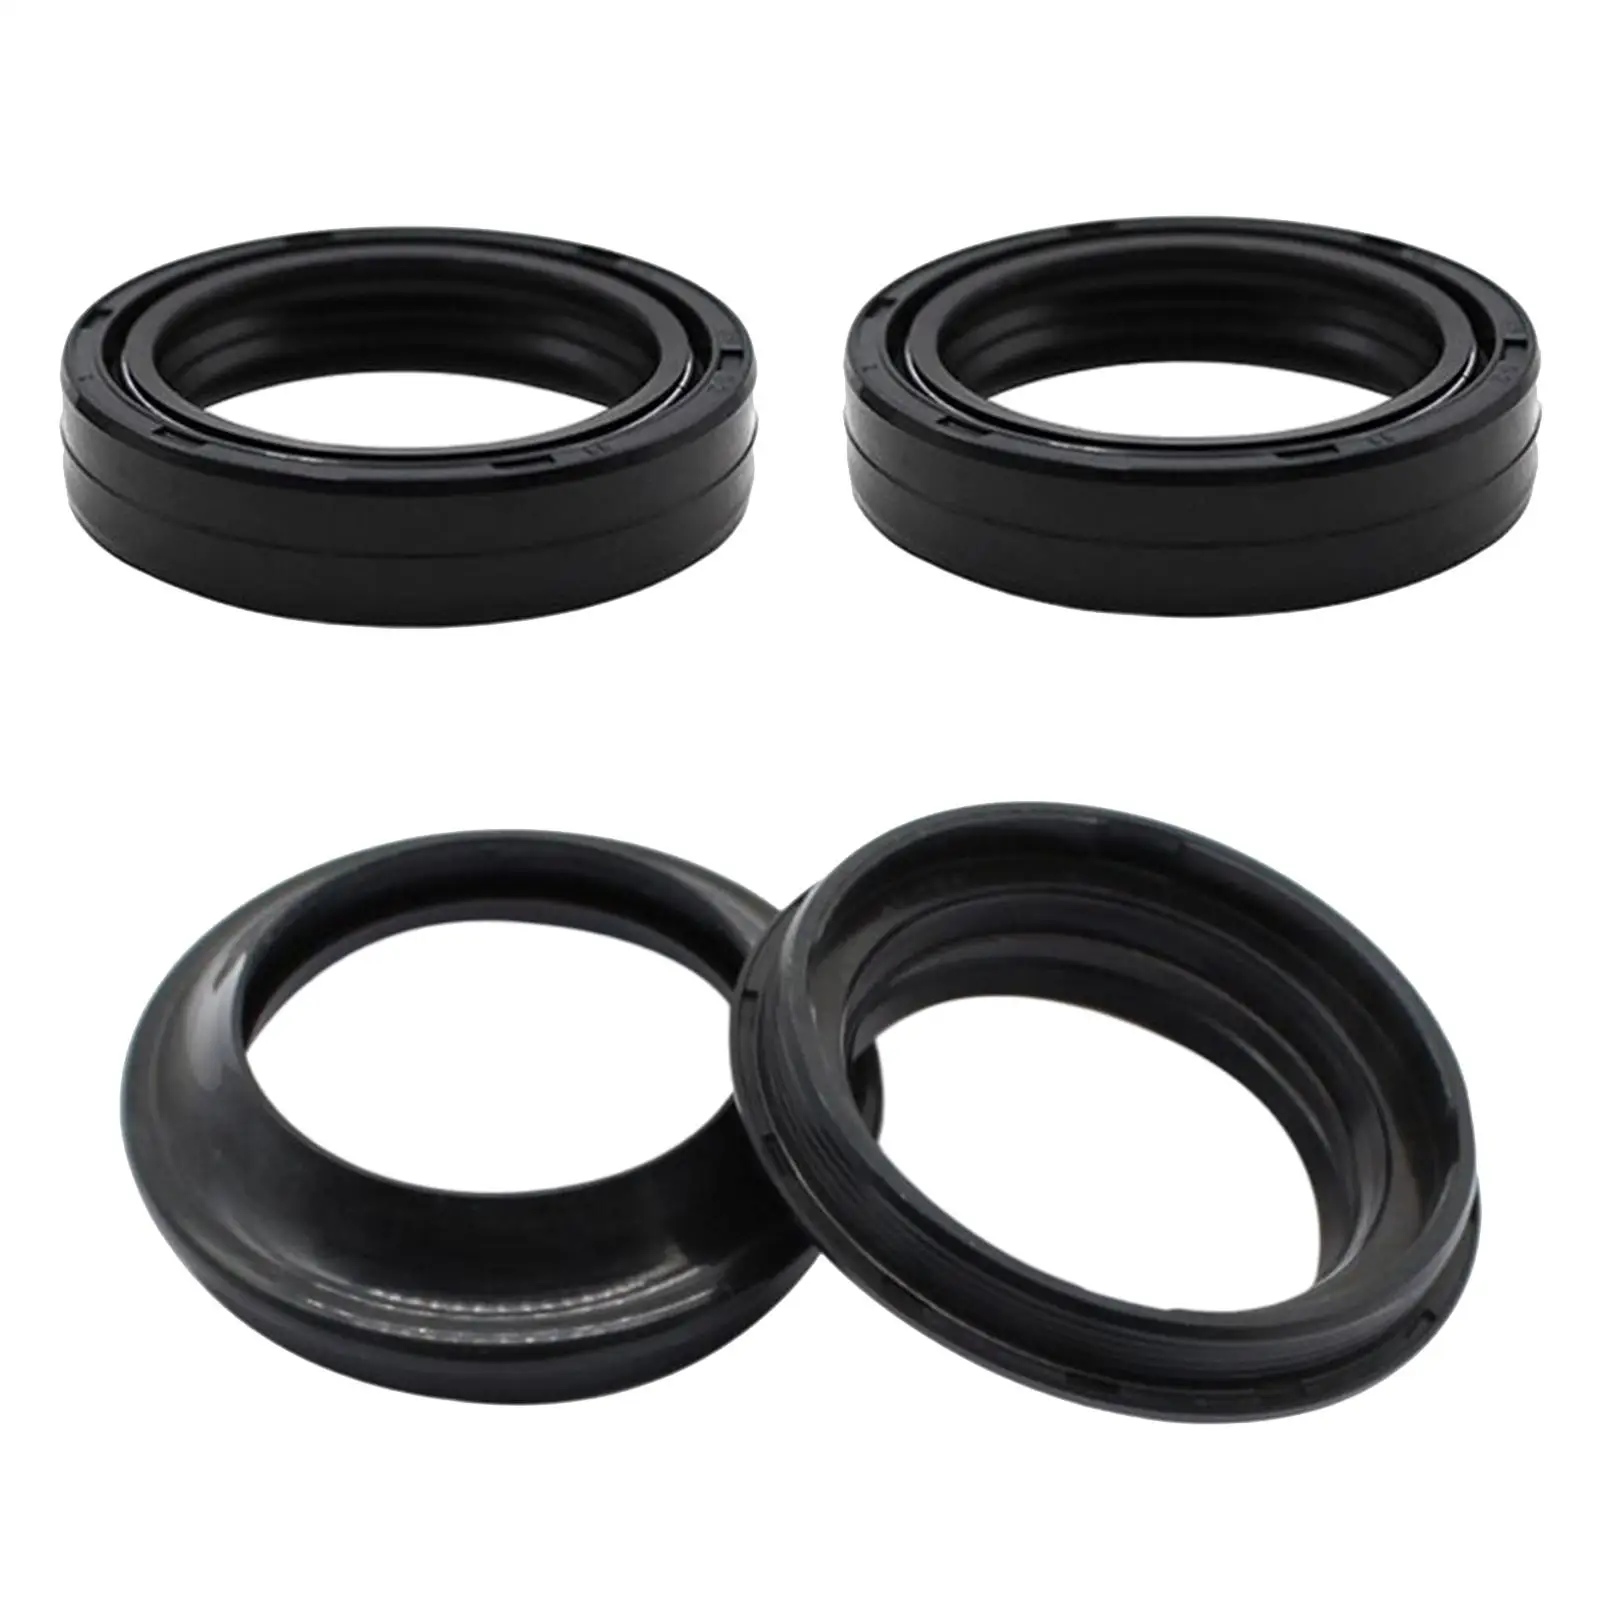 Motorcycle Fork Seal and Dust Seal Kit 49x60x10mm Rubber for Klx400 VN2000 RM250 Dr-Z400E RM125 Replace Parts